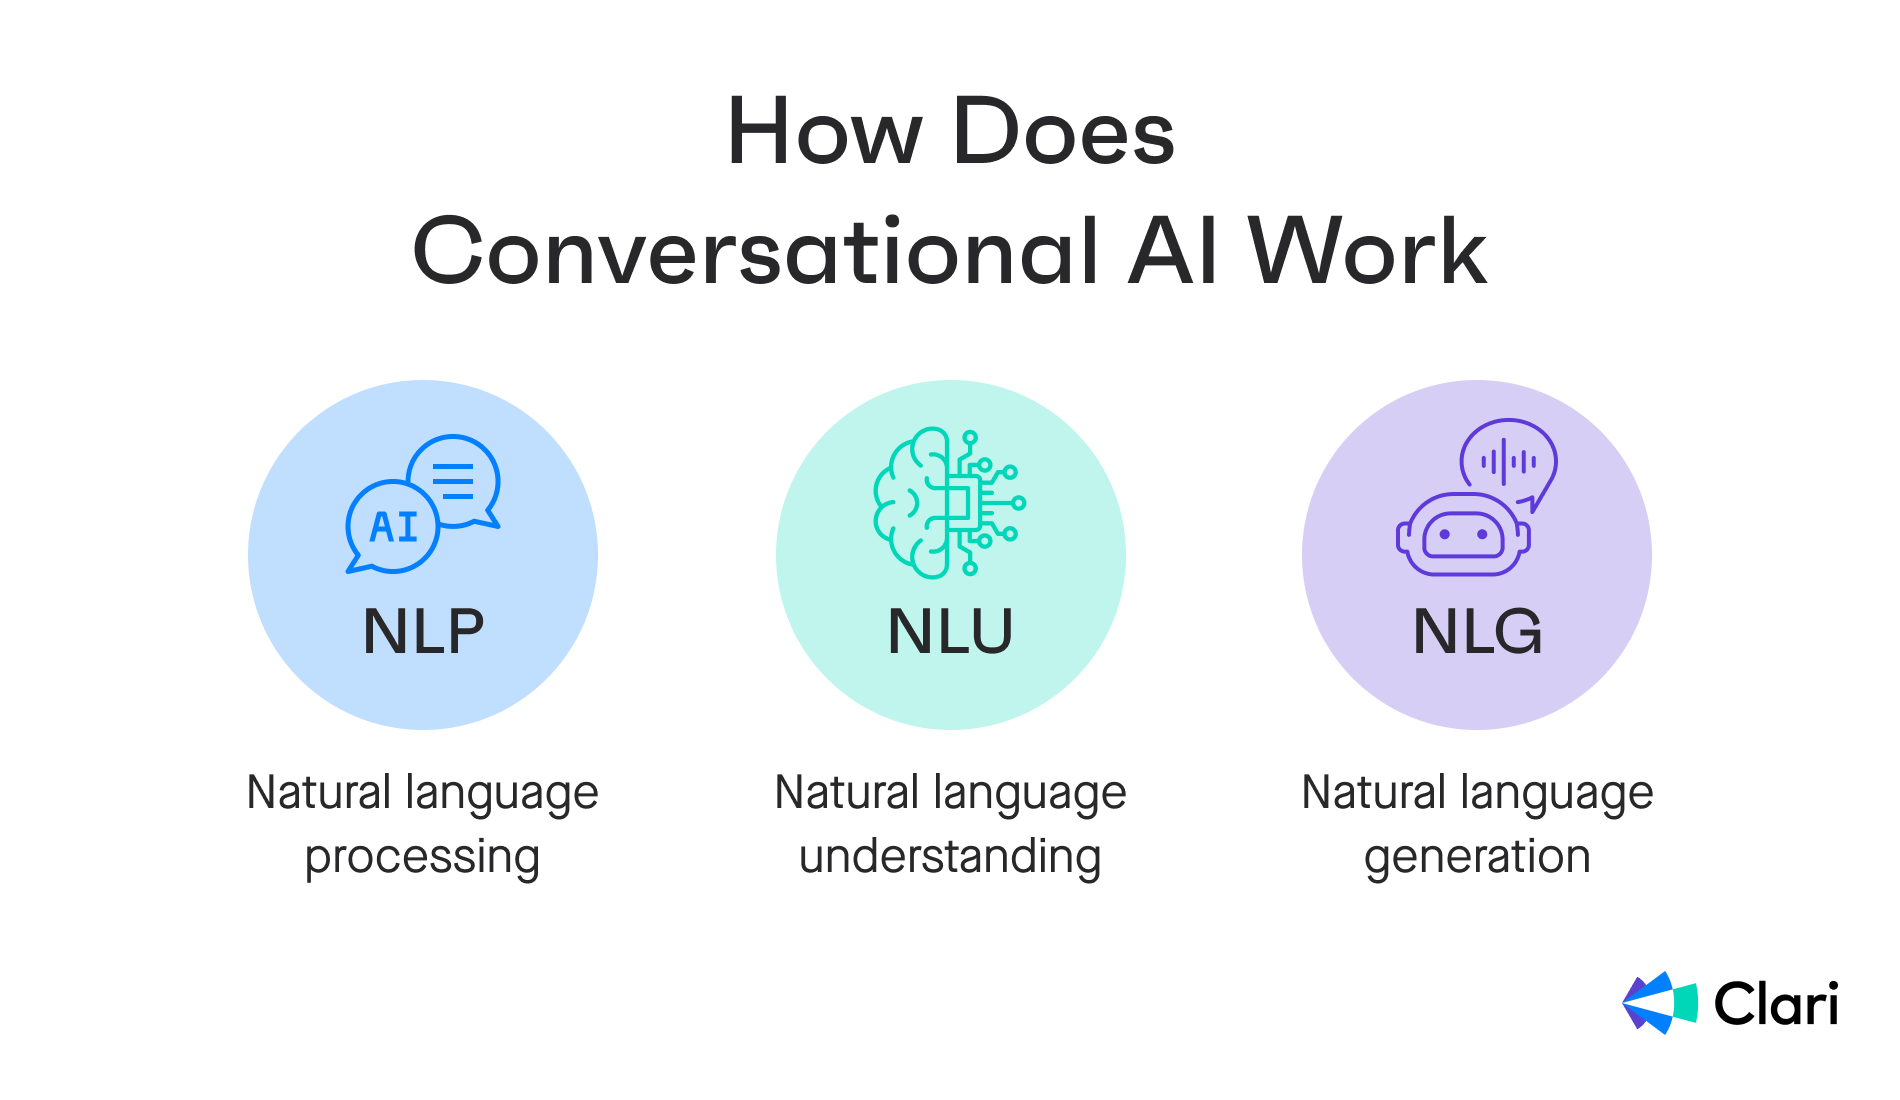 How does conversational AI work